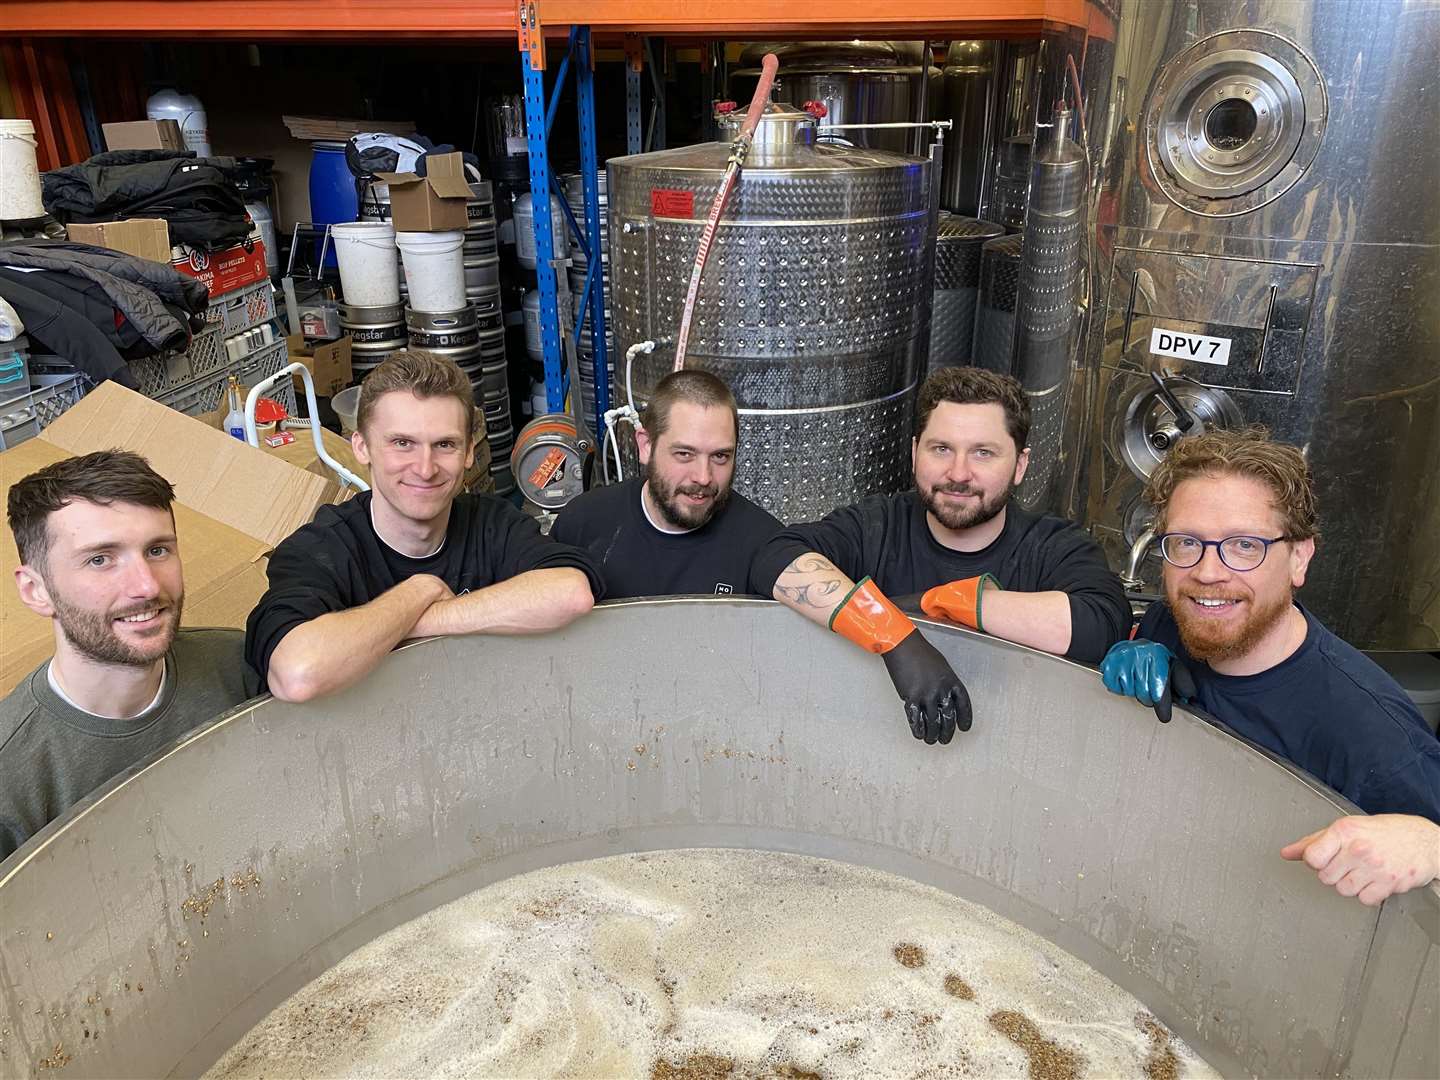 The Moot Brew brewery team (from left) Patrick, Will, Ian, Tom and Calvin